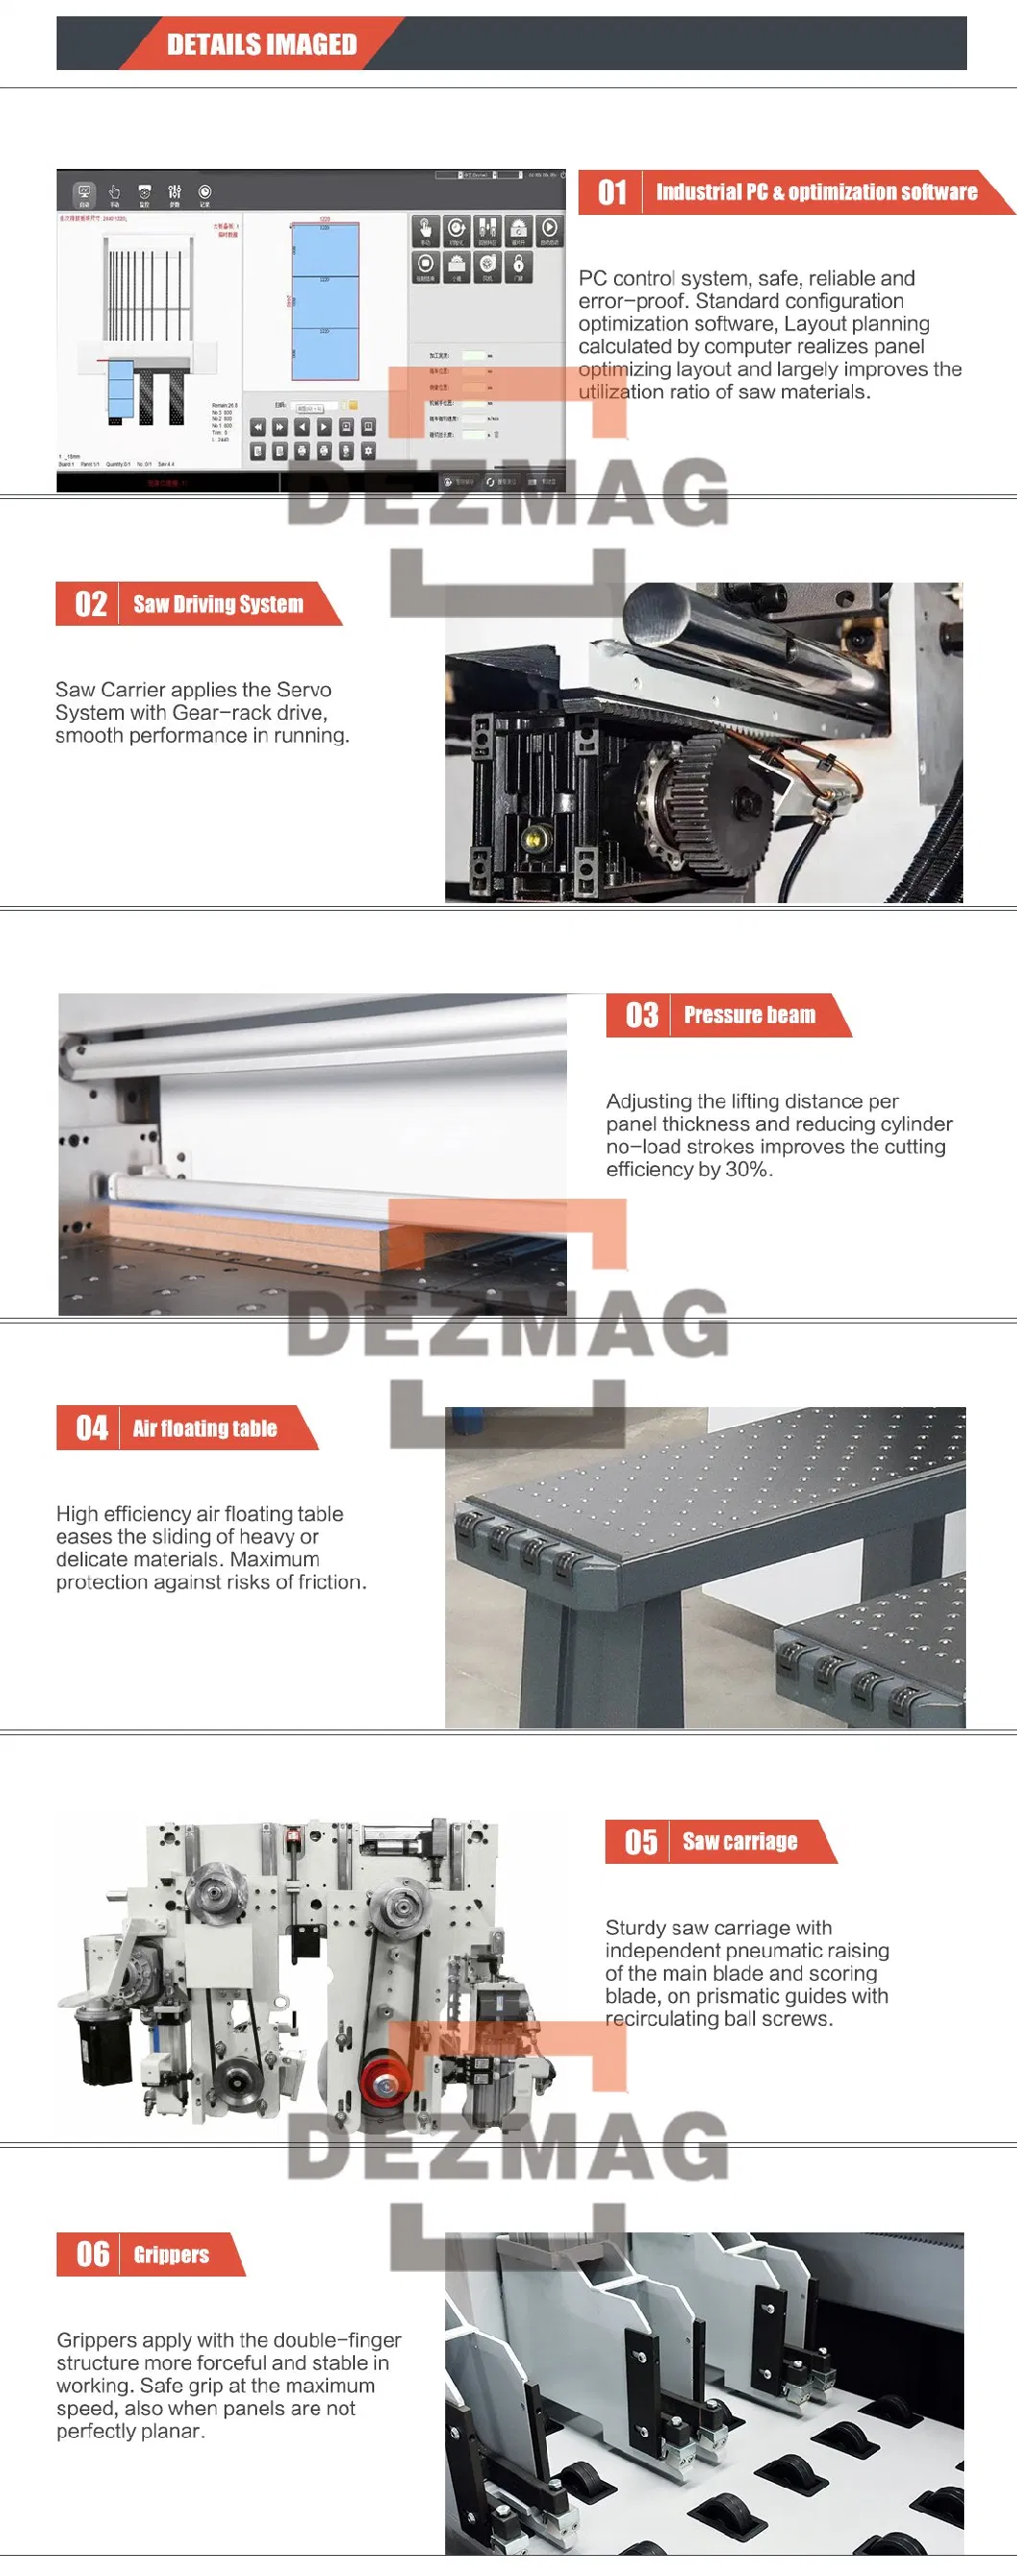 Dezmag Automatic Computer Panel Sizing Saw Woodworking Machine